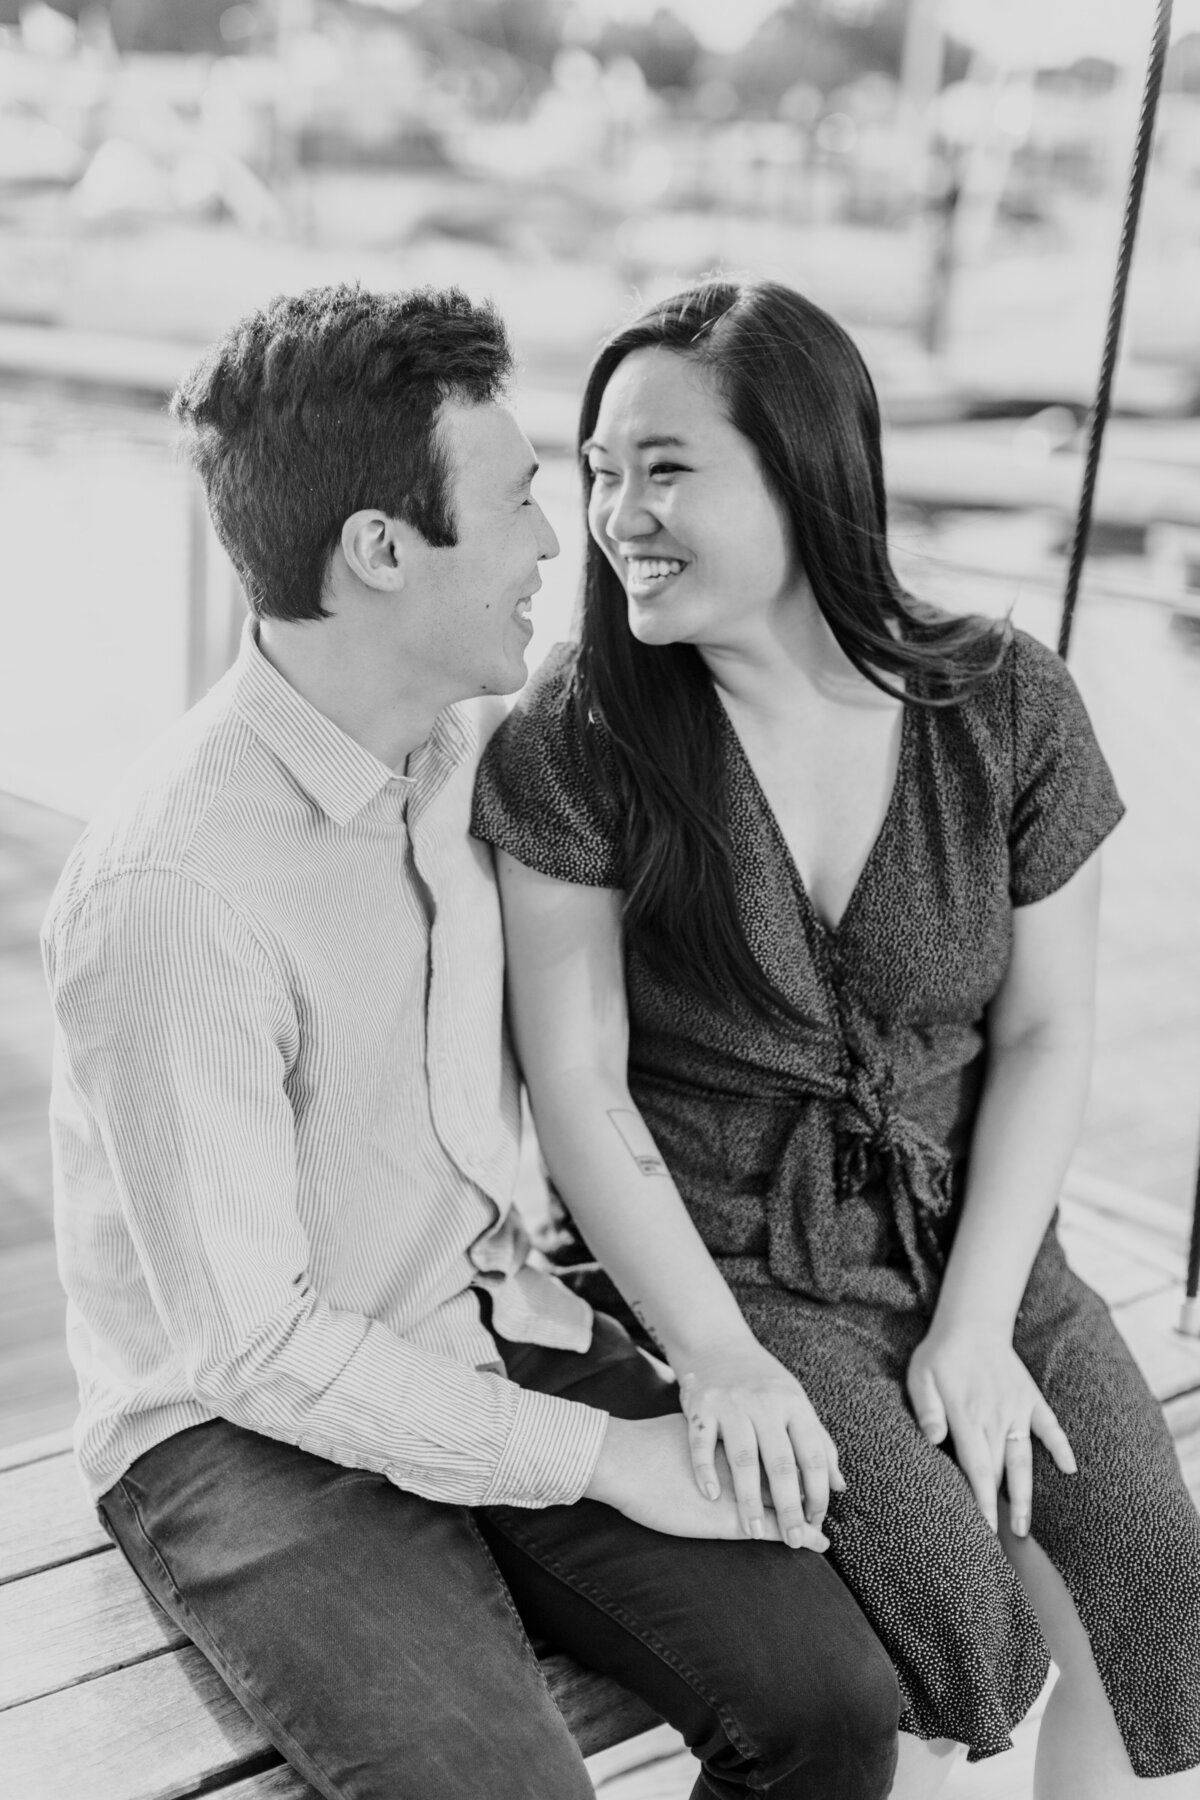 Becky_Collin_Navy_Yards_Park_The_Wharf_Washington_DC_Fall_Engagement_Session_AngelikaJohnsPhotography-7544-2